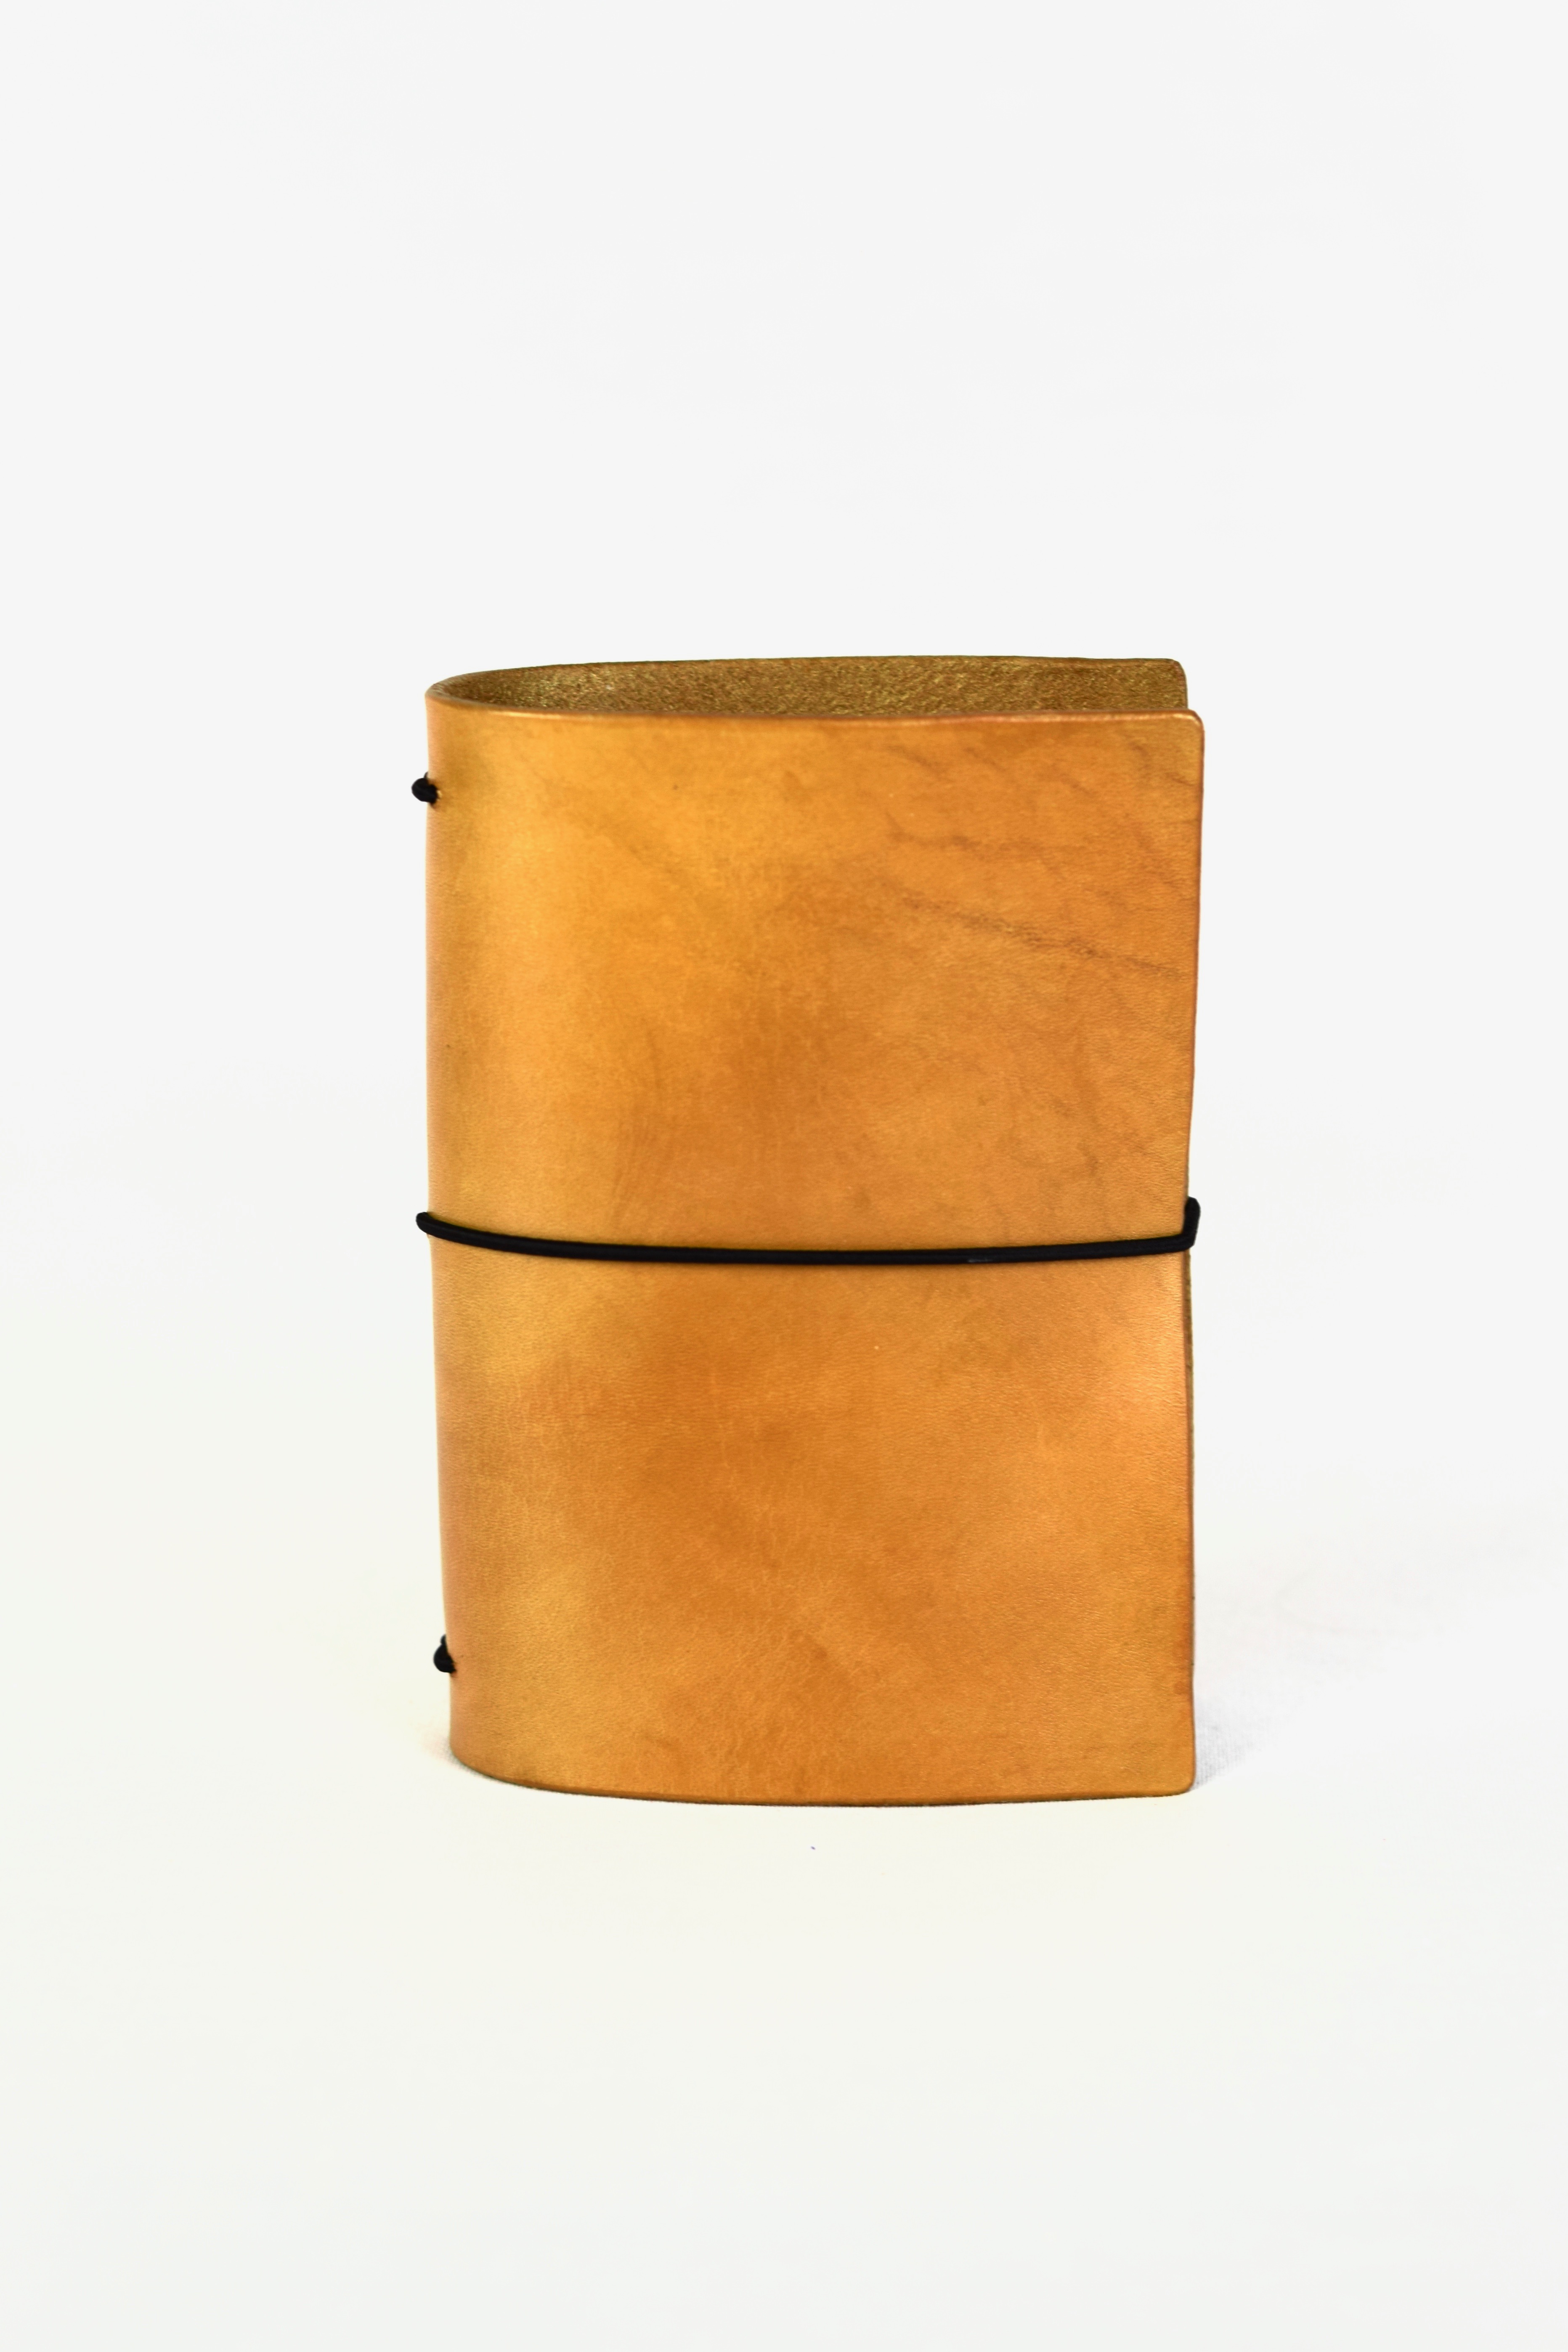 gold leather traveler's notebook